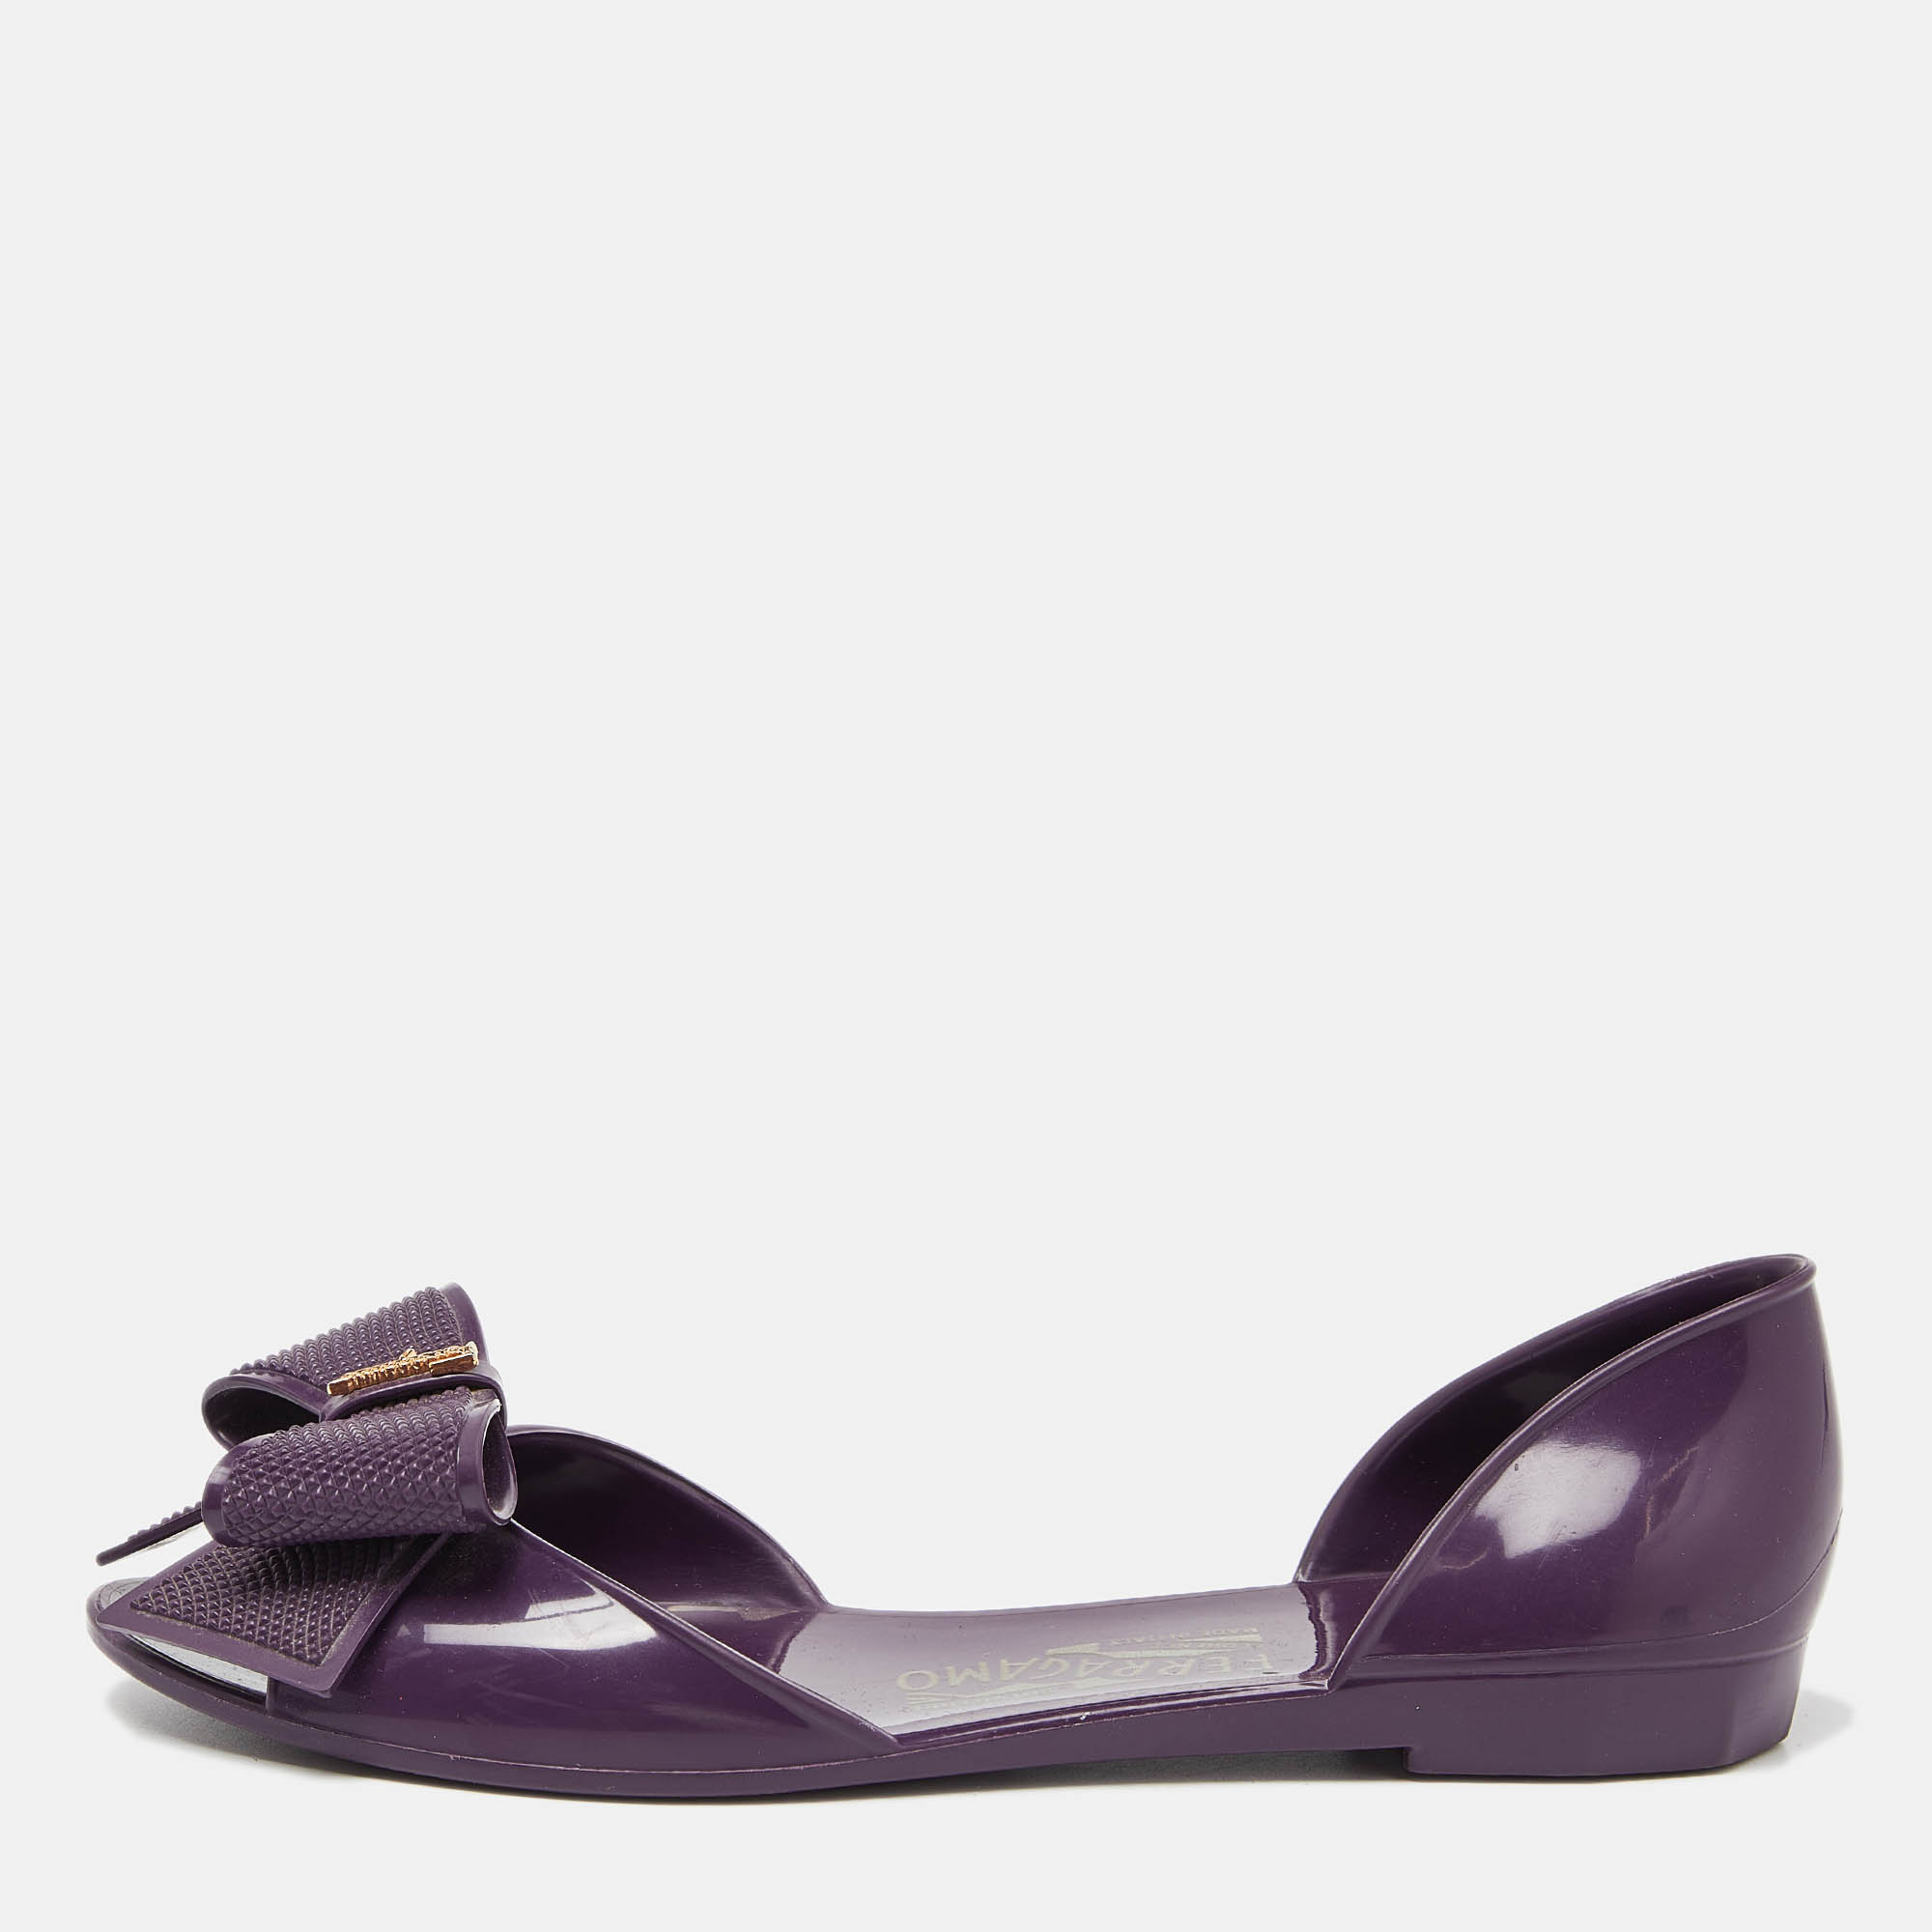 Pre-owned Ferragamo Purple Jelly Barbados Bow Ballet Flats Size 35.5